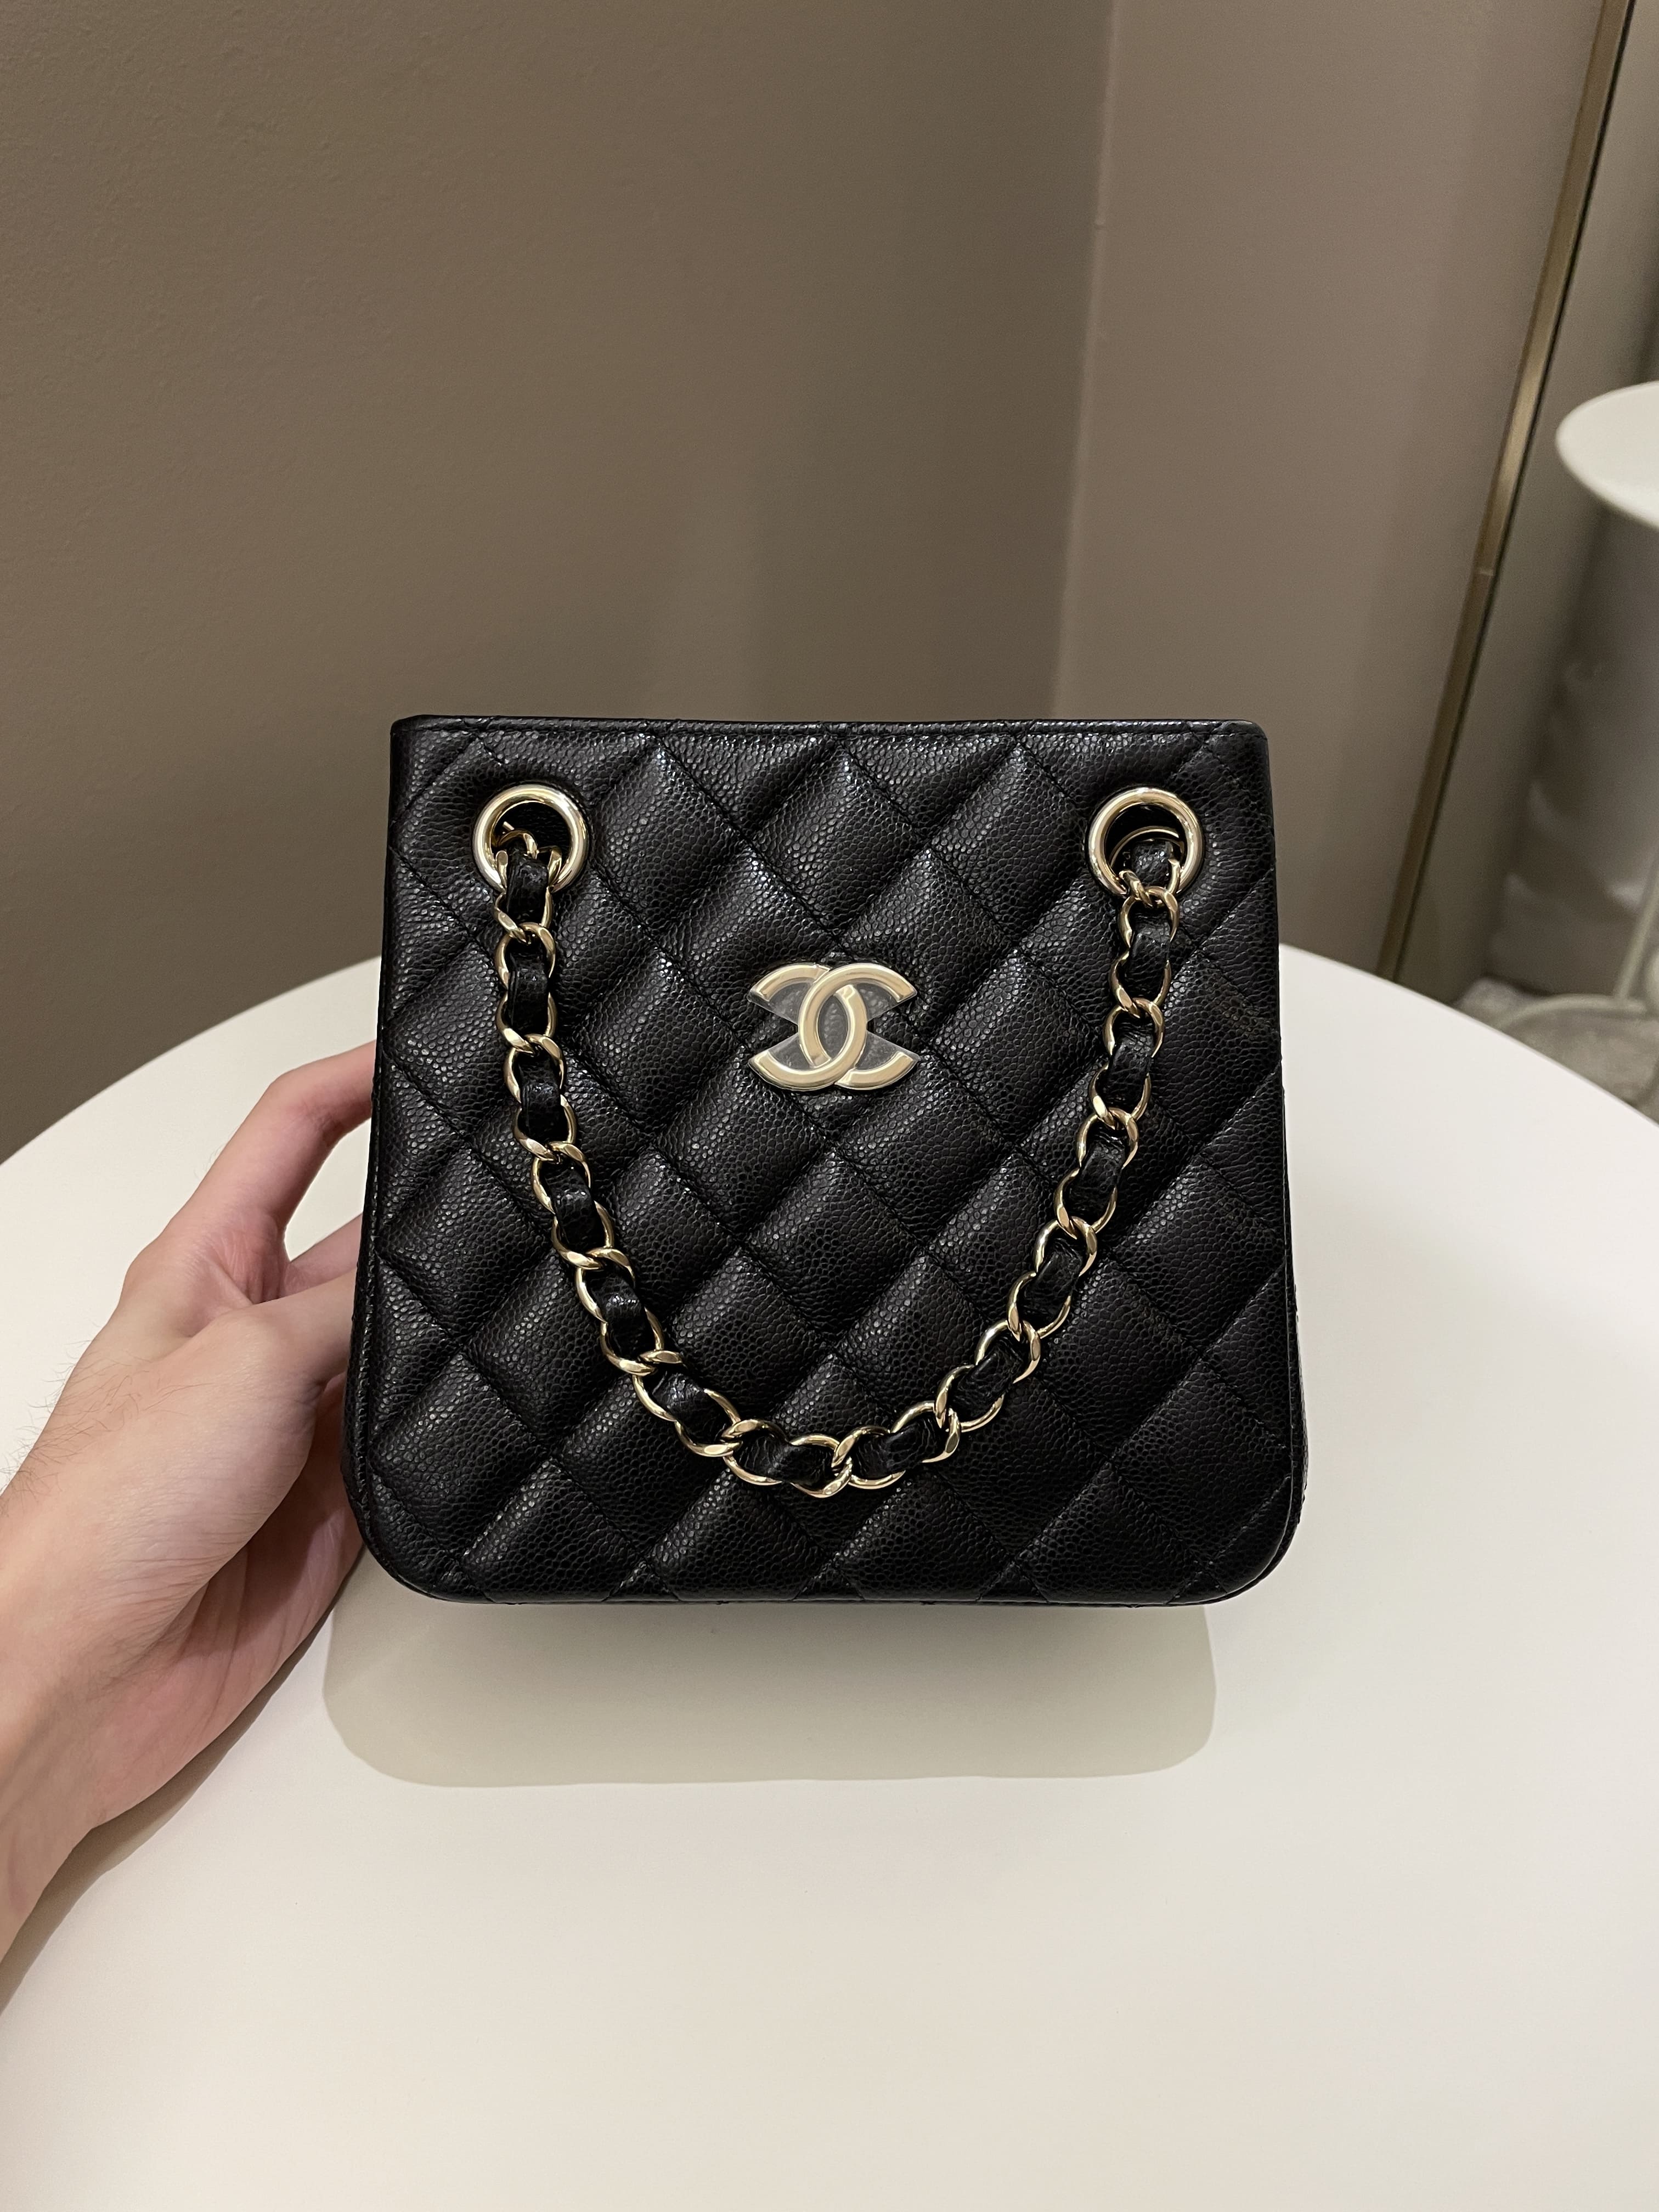 Chanel Quilted Cc Bucket Bag Black Caviar